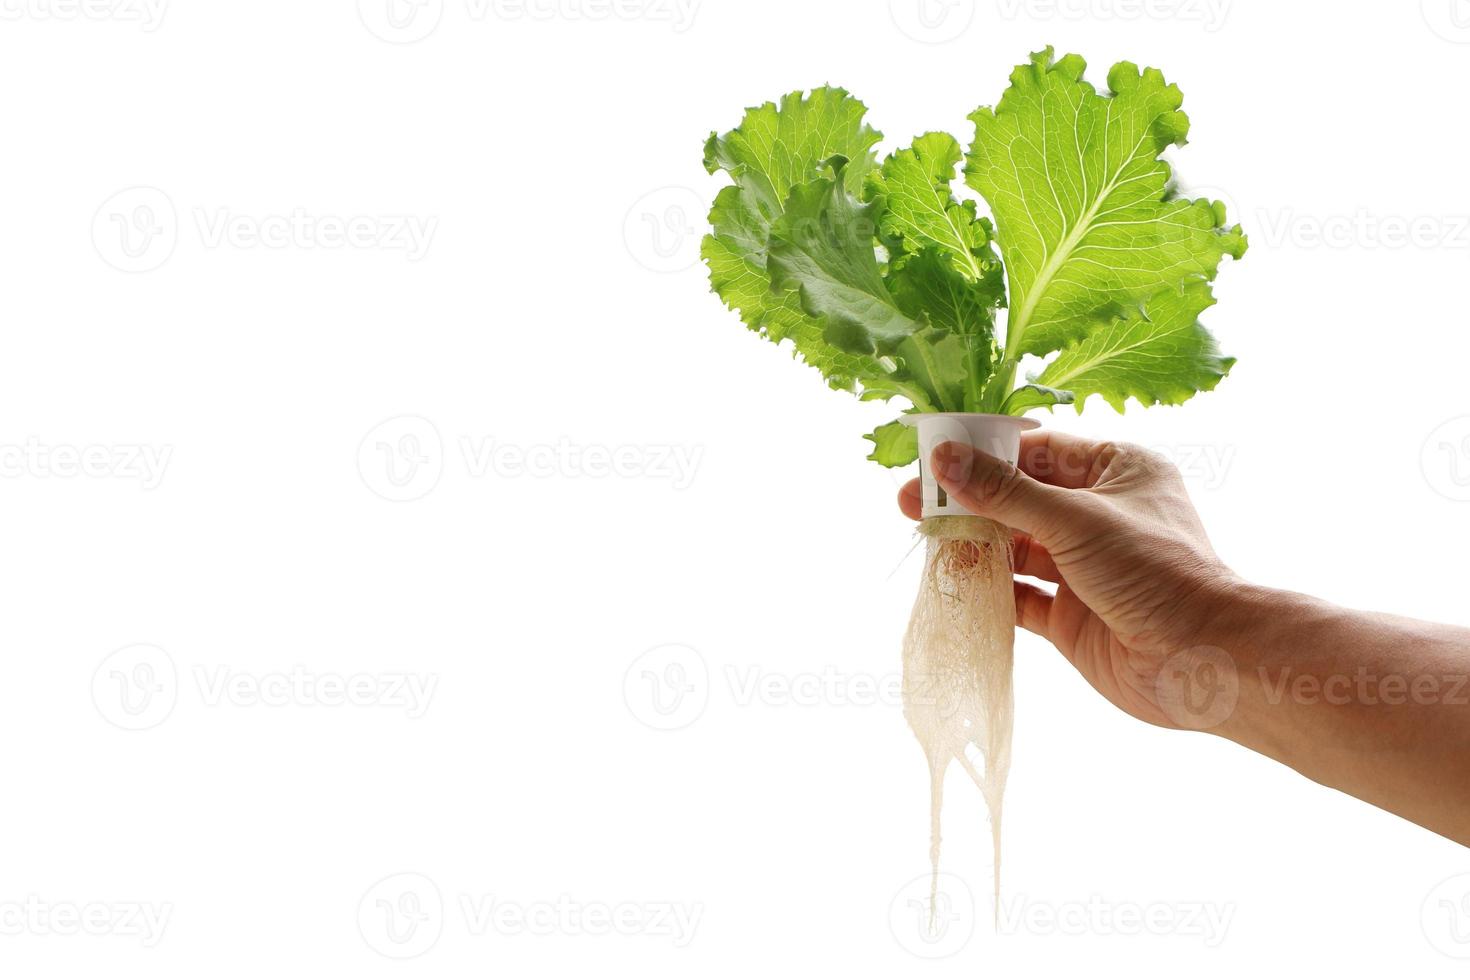 Hand of young man holding a white hydroponic pot with vegetable seedlings growing on a sponge isolated on white background with clipping path. Grow vegetables without soil concept. photo